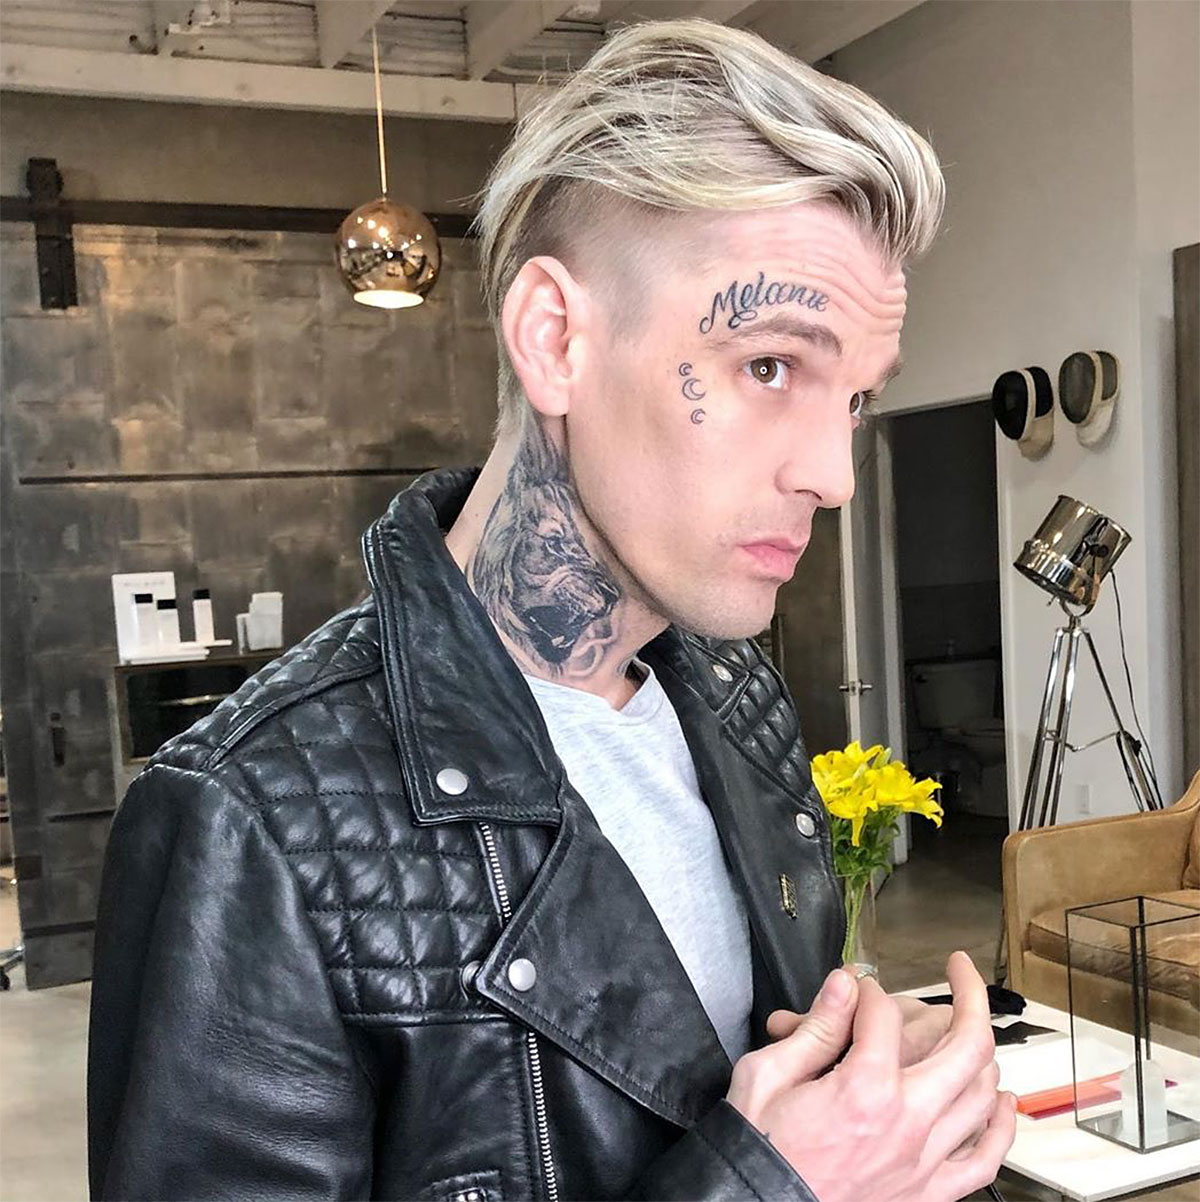 Aaron Carter Gets Face Tattoo Dedicated to Girlfriend Melanie: Pics